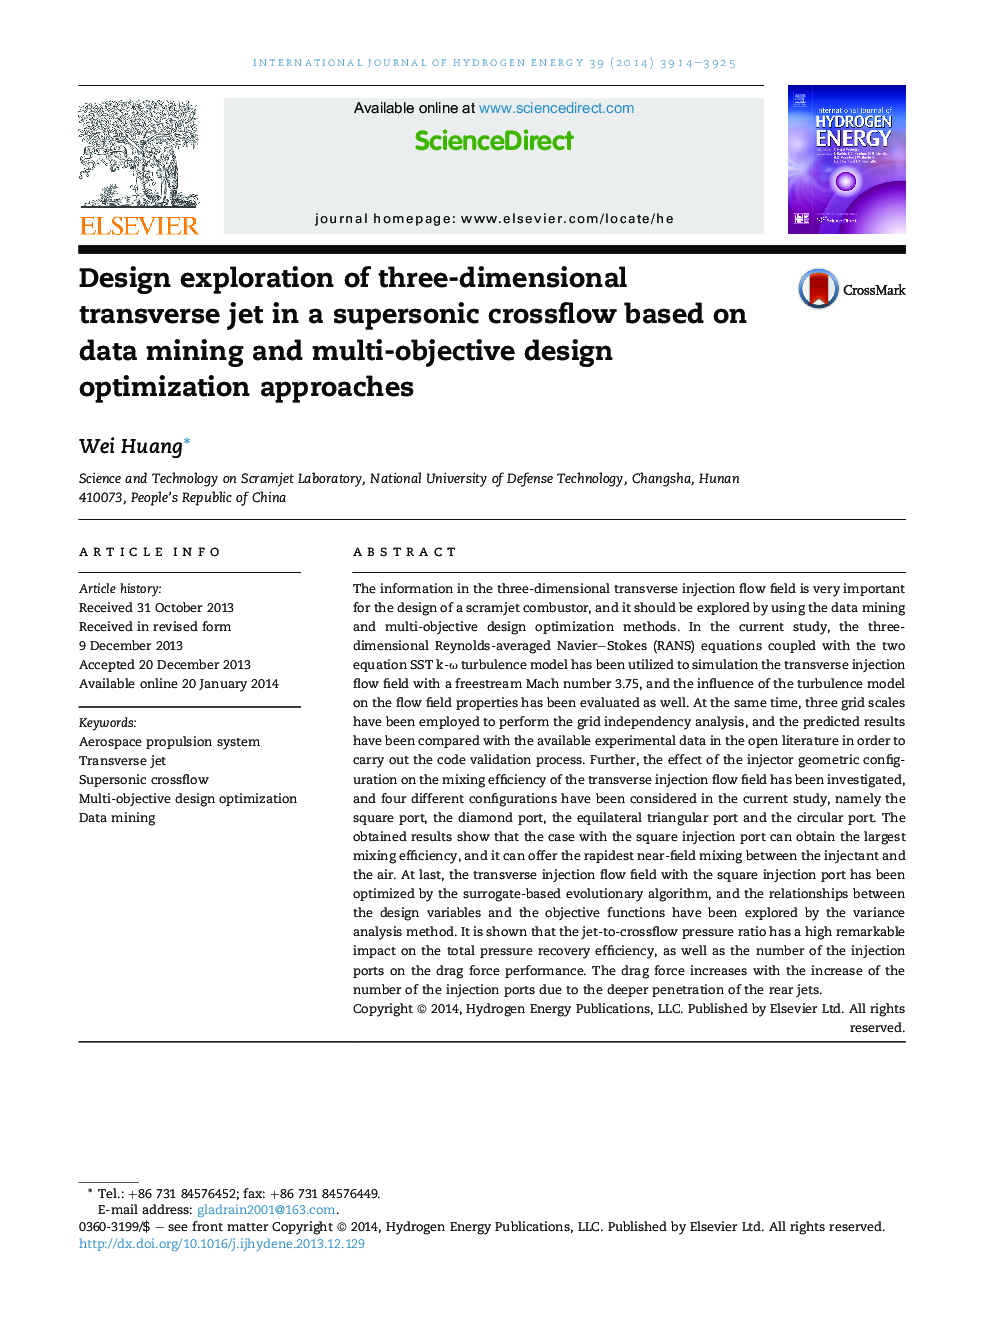 Design exploration of three-dimensional transverse jet in a supersonic crossflow based on data mining and multi-objective design optimization approaches